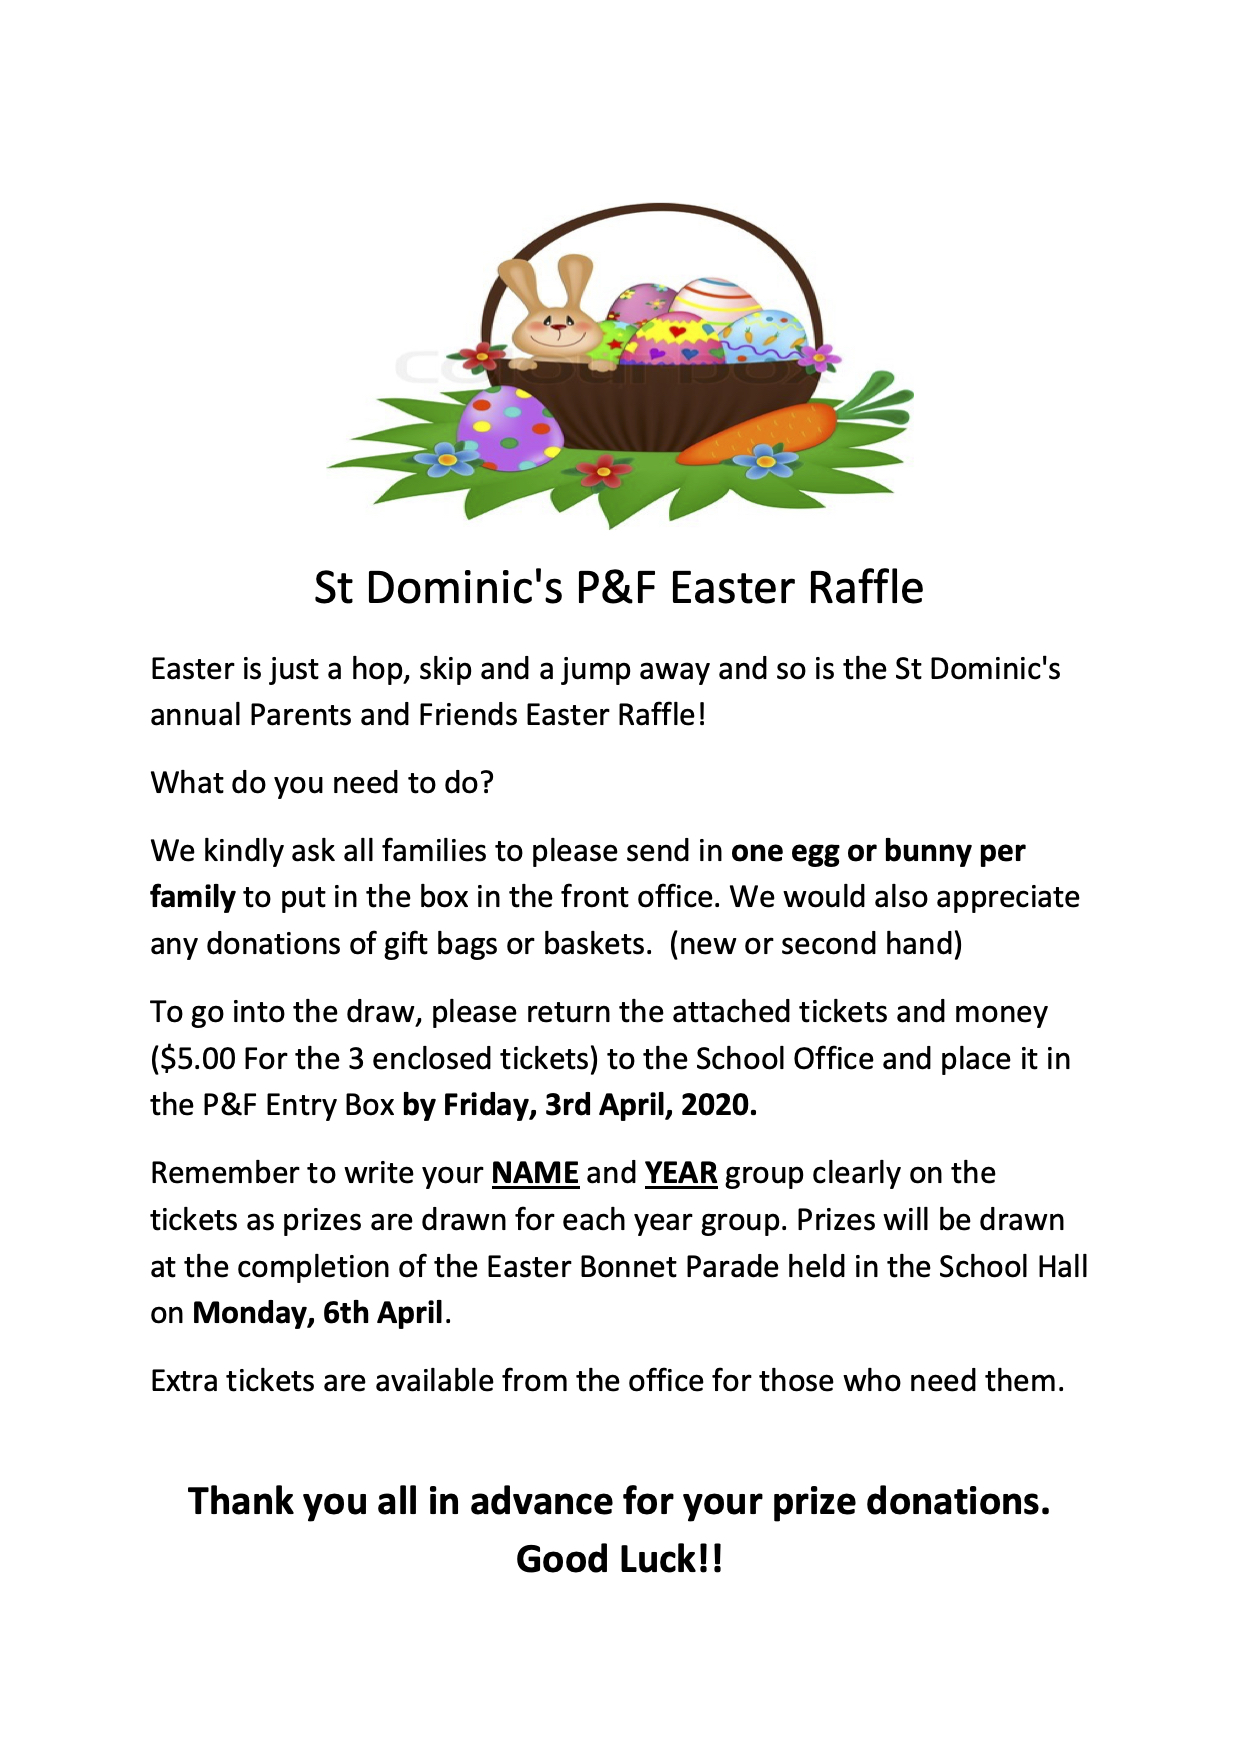 P&F Annual Easter Raffle Details